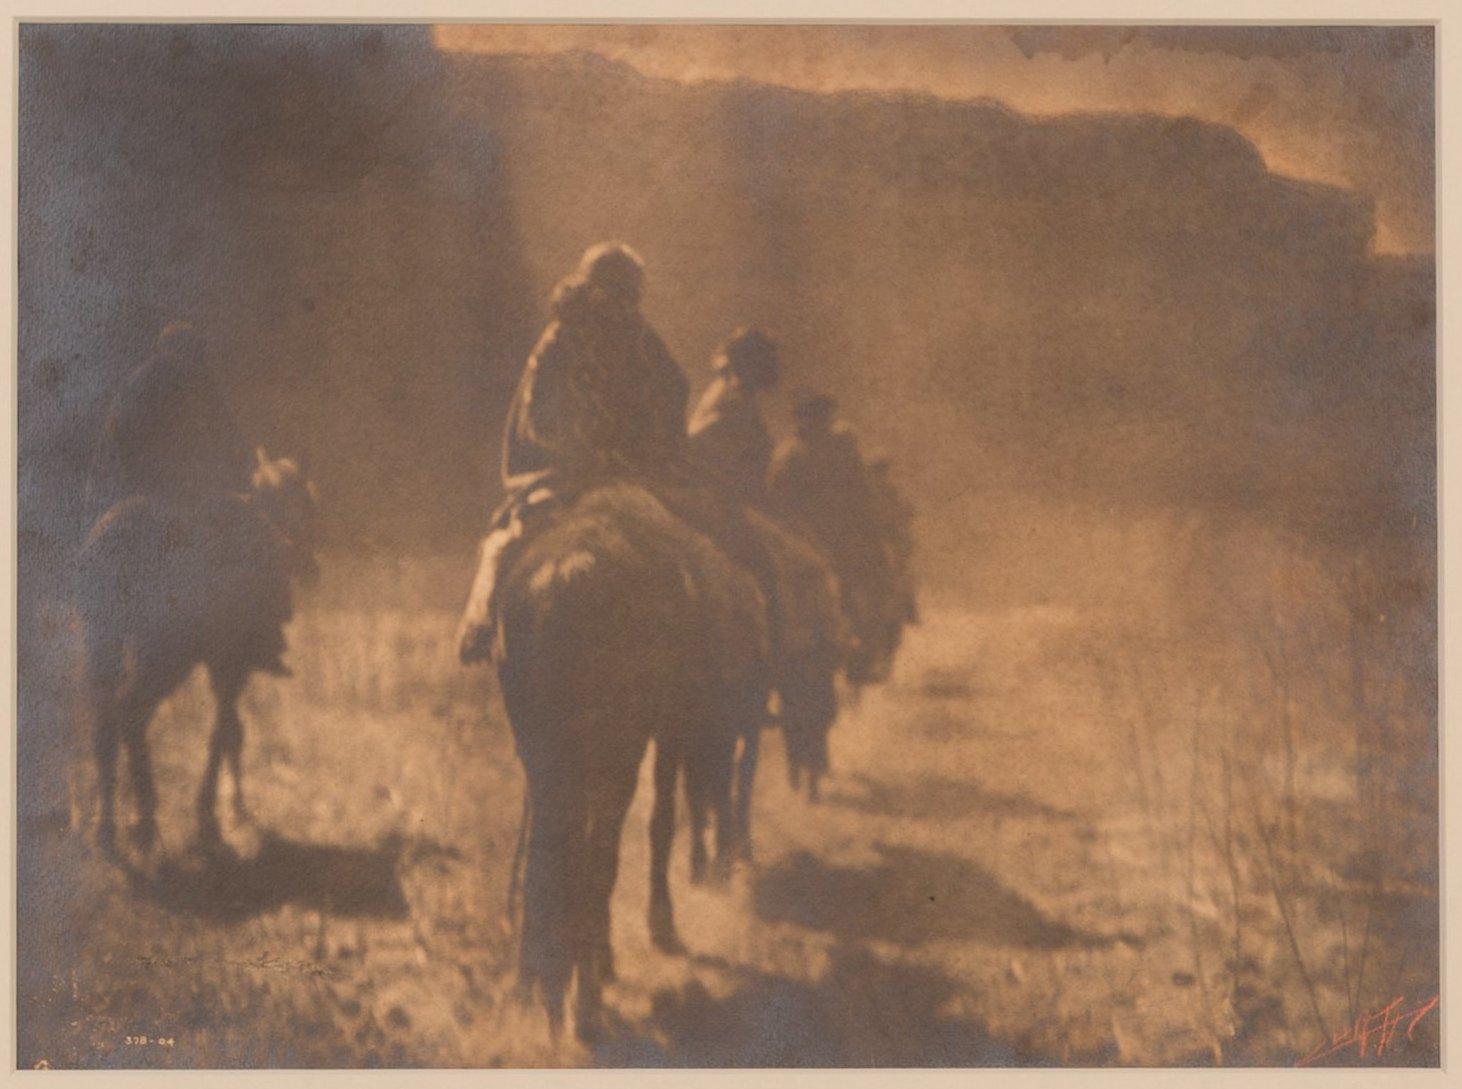 American The Vanishing Race, Signed by Edward S. Curtis, Gelatin Silver Photograph, 1904